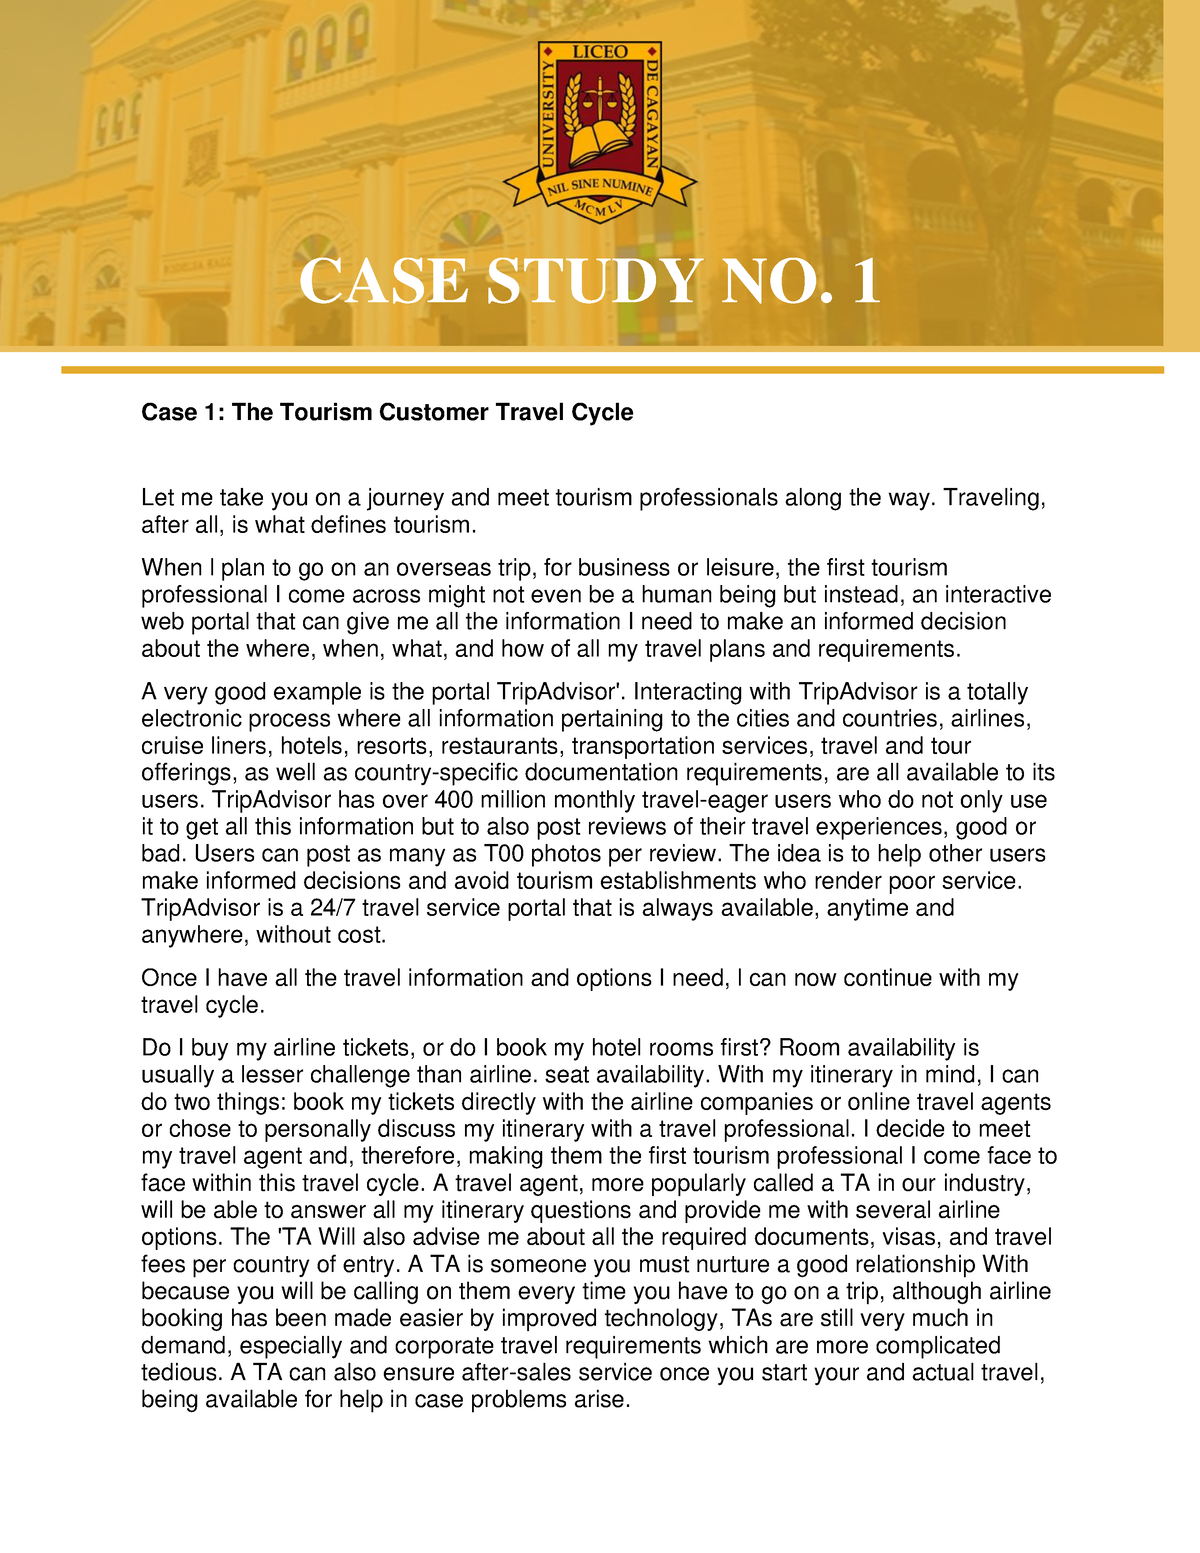 the tourism customer travel cycle case study brainly